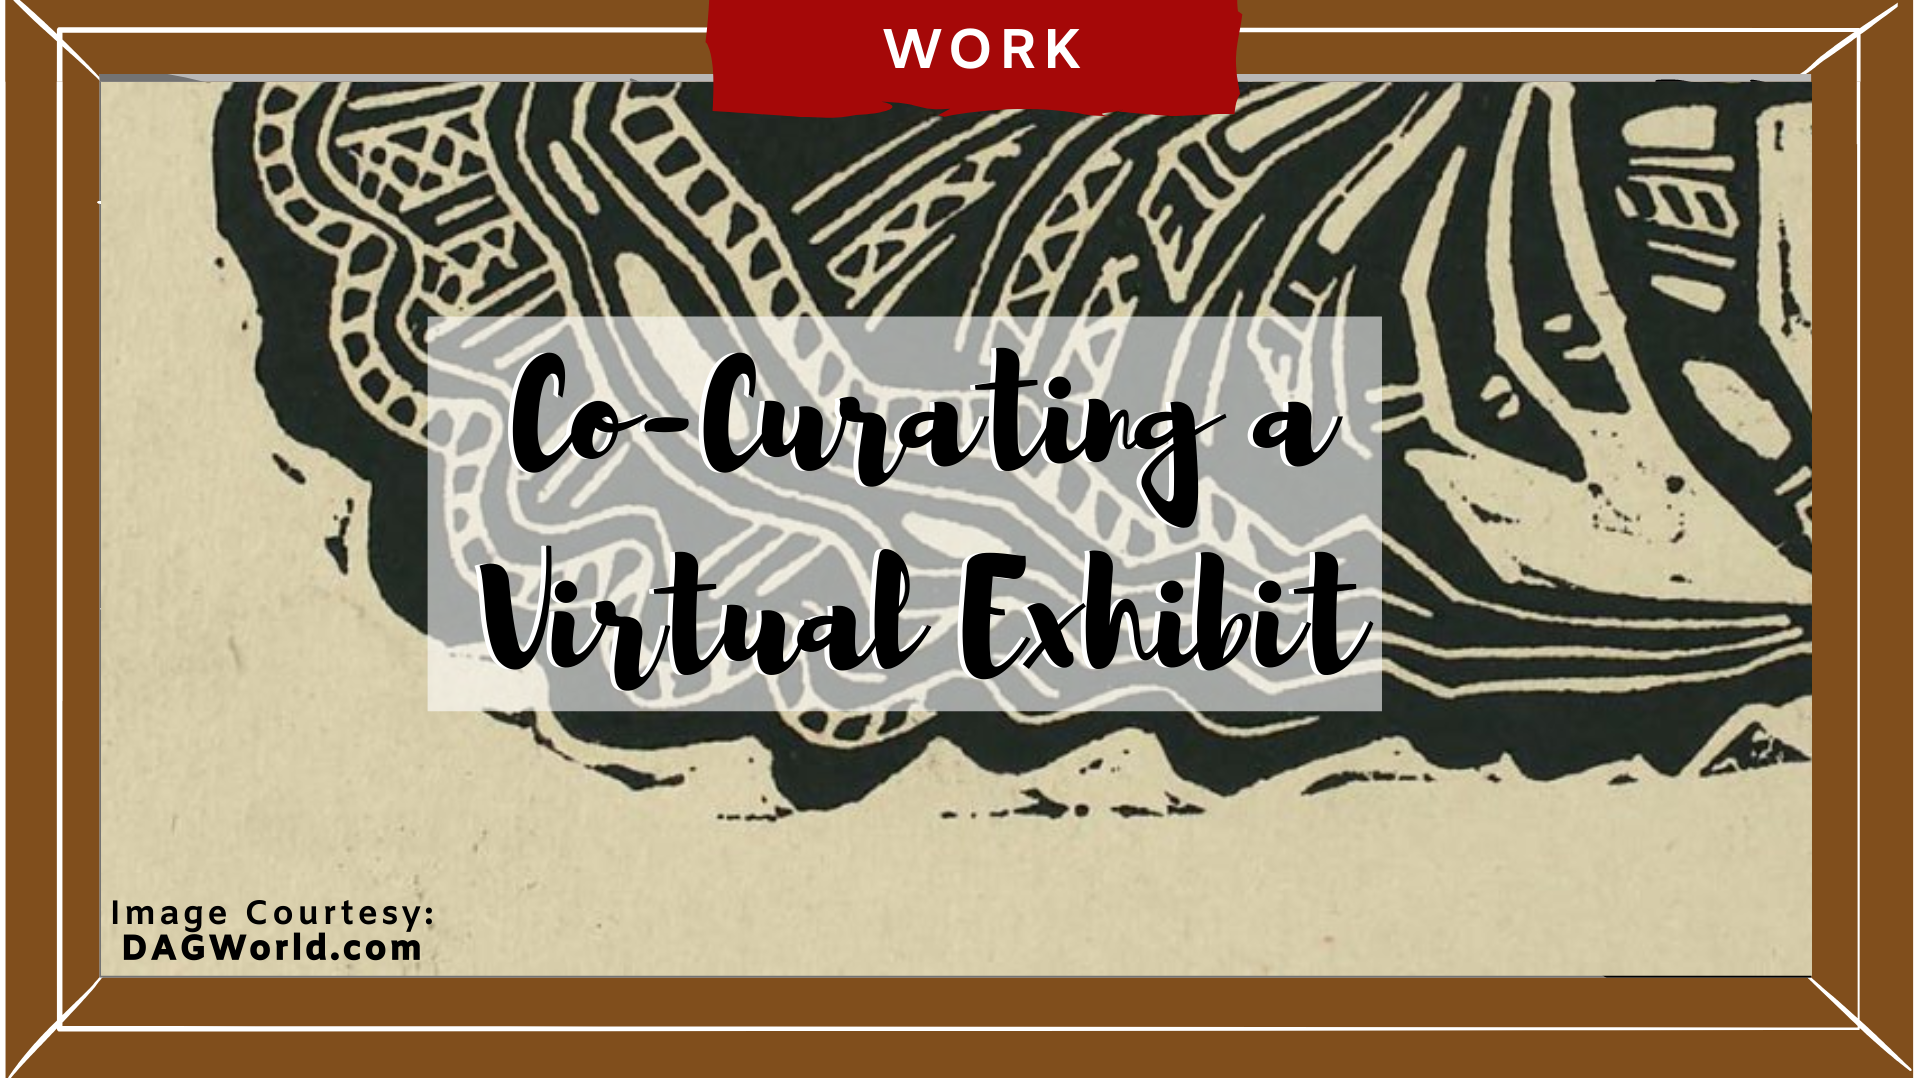 Co-Curating a Virtual Exhibit Banner